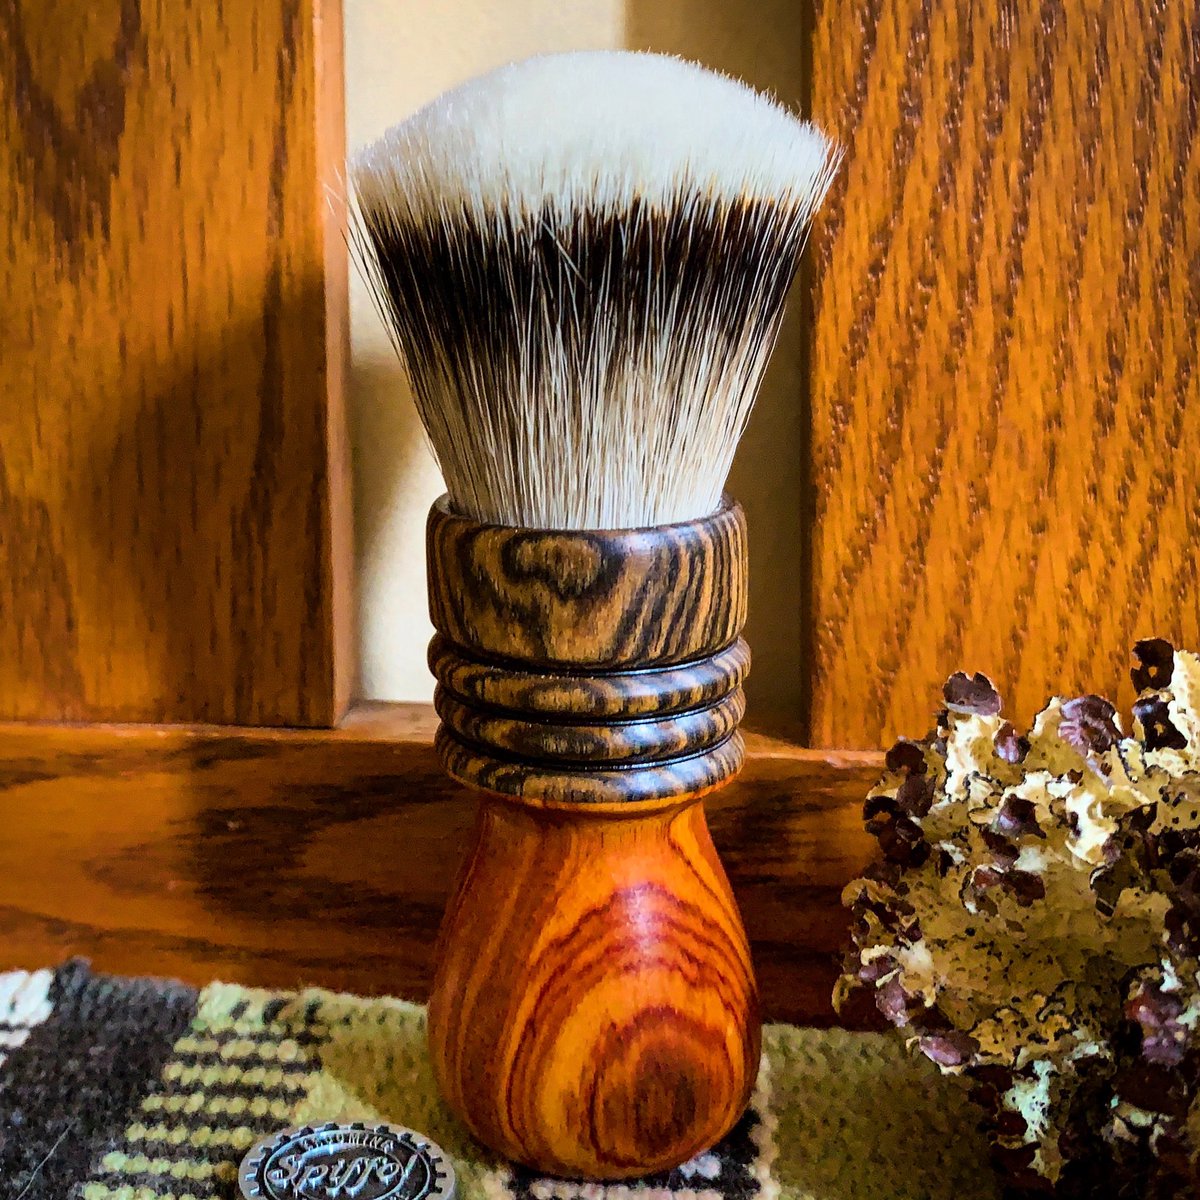 Santini features a ferrule made of Bocote that tops, and complements, the sharply contrasting Canarywood base. The combination of these two exotic woods and the super high-density 24mm High Mountain White fan style knot creates a shaving brush that is a classic as it is unique!